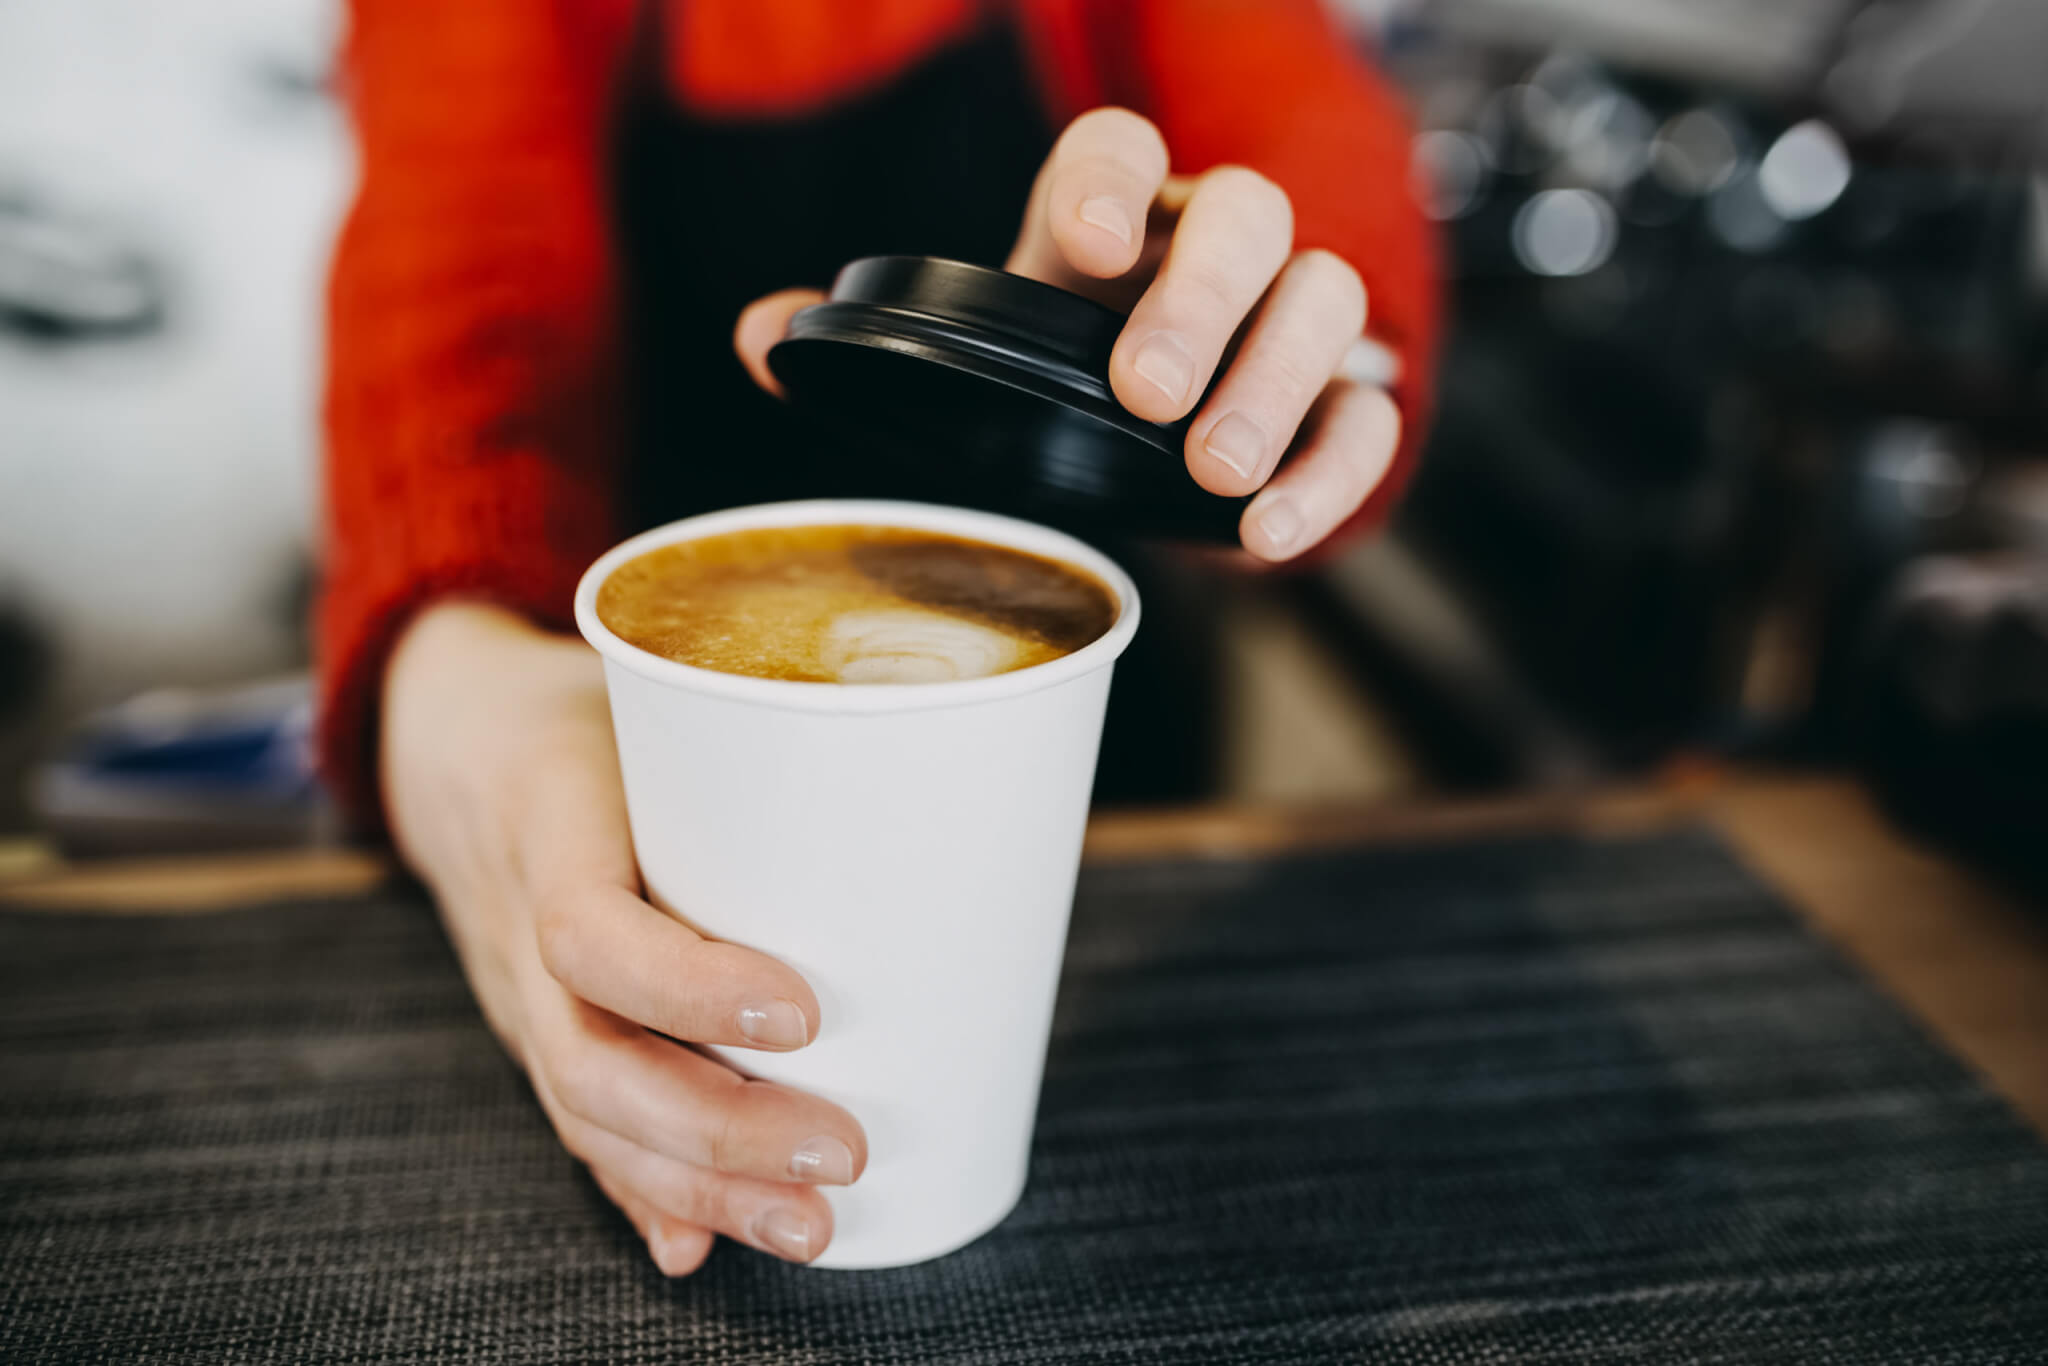 Is It Bad to Use Paper-Oriented Disposable Cups for Hot Drinks? News Center